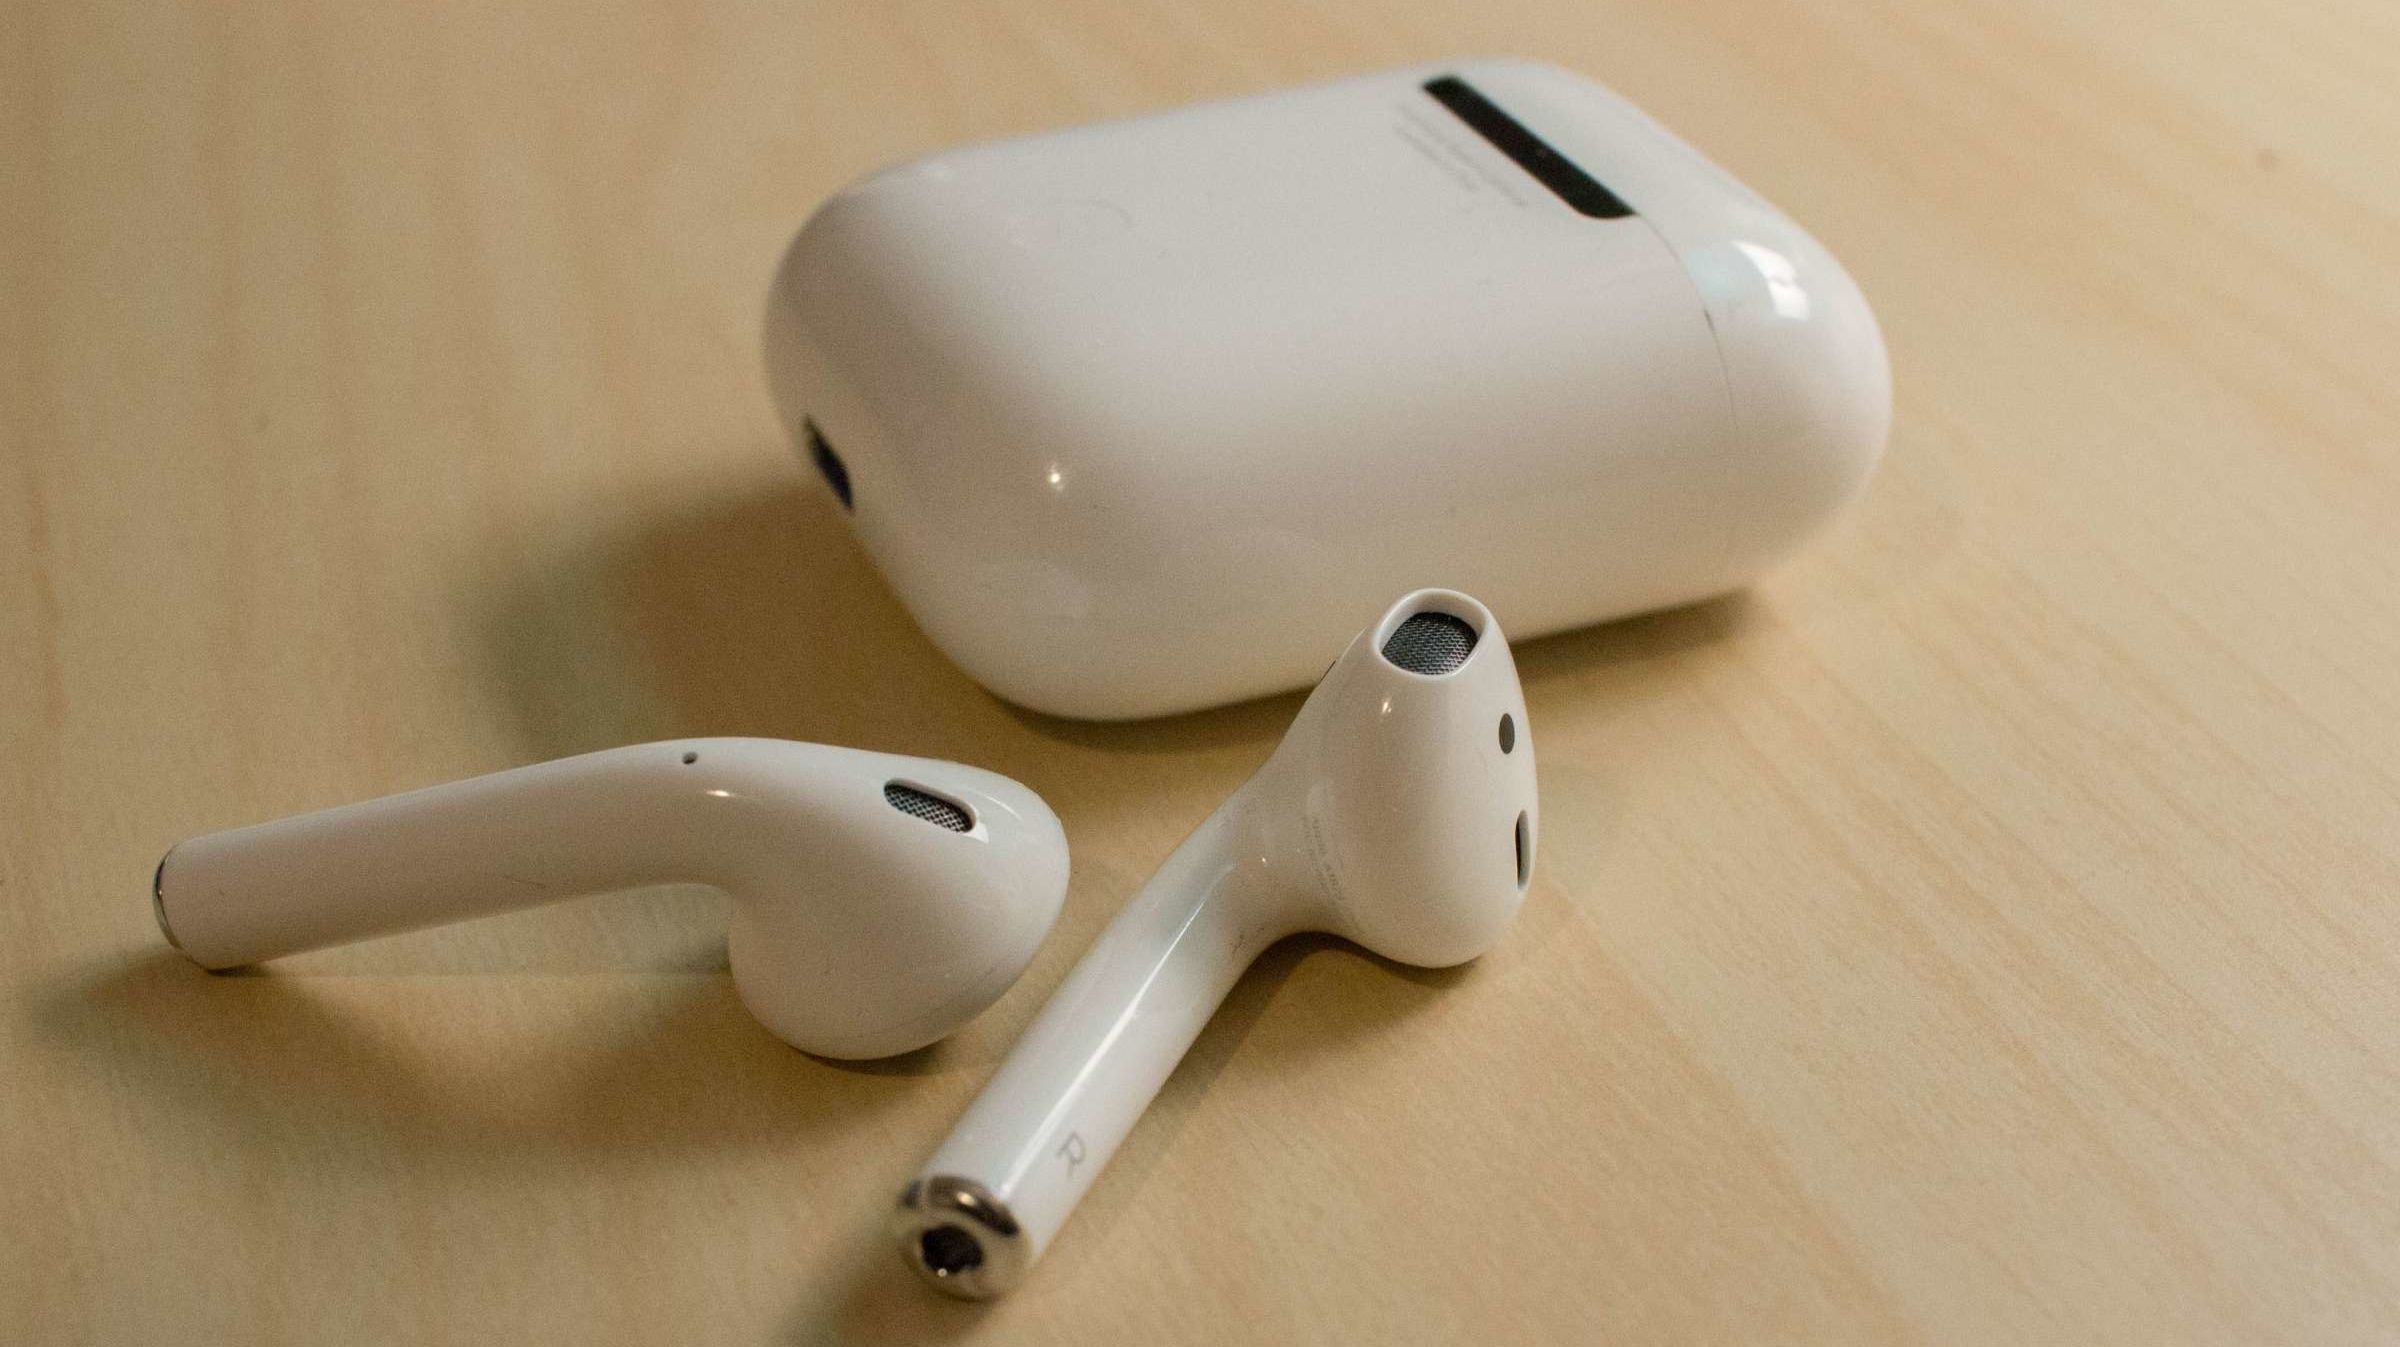 The Link Between Star Wars and Apple’s Earbuds